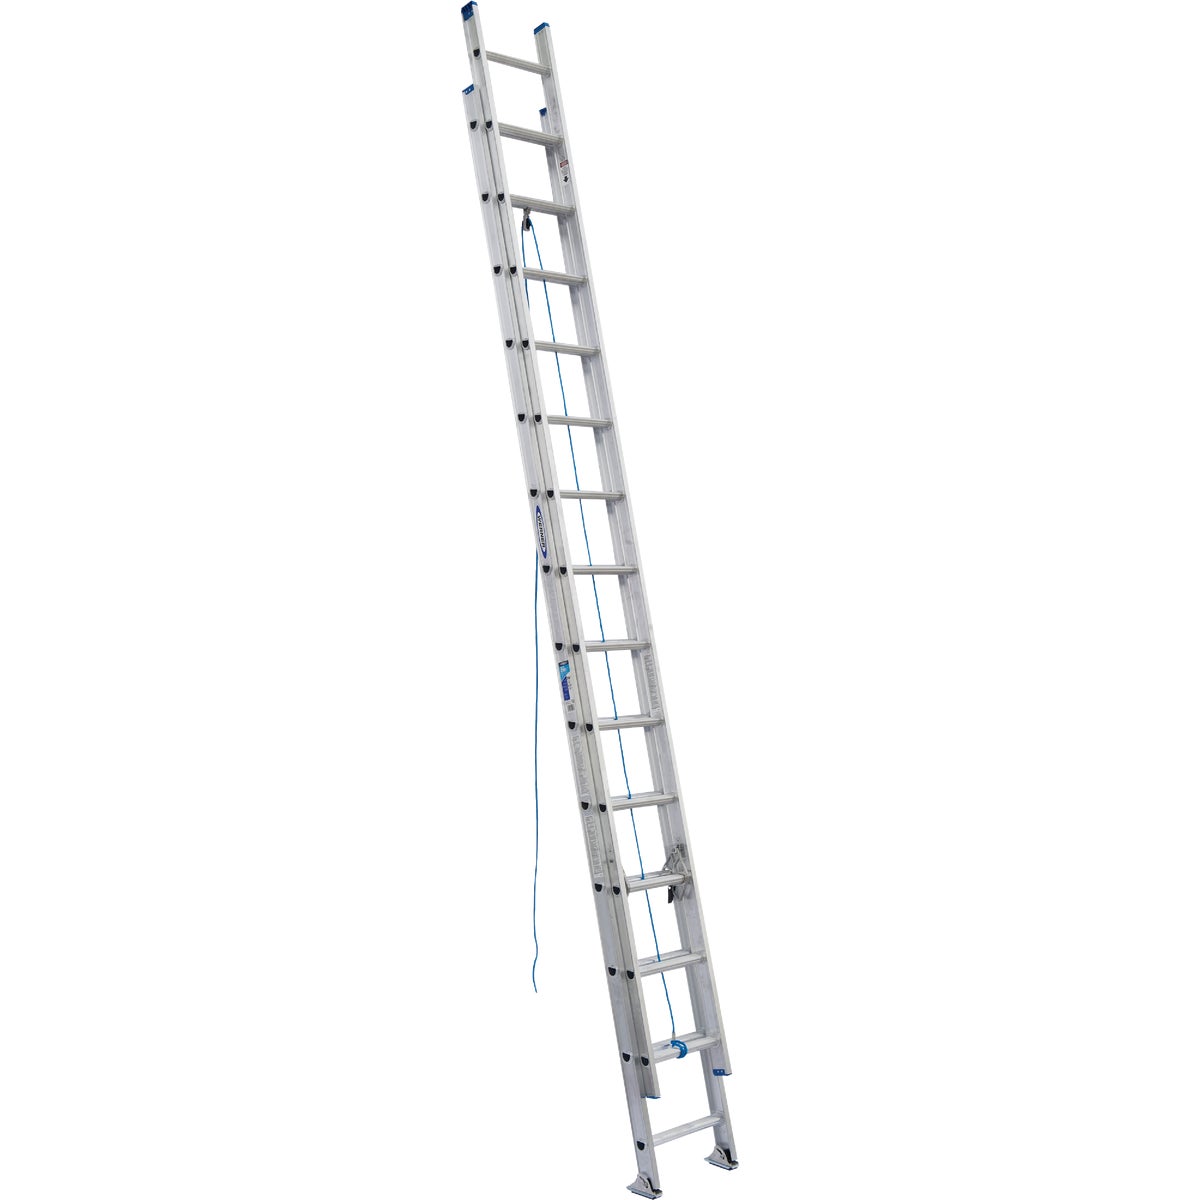 Werner 28 Ft. Aluminum Extension Ladder with 250 Lb. Load Capacity Type I Duty Rating